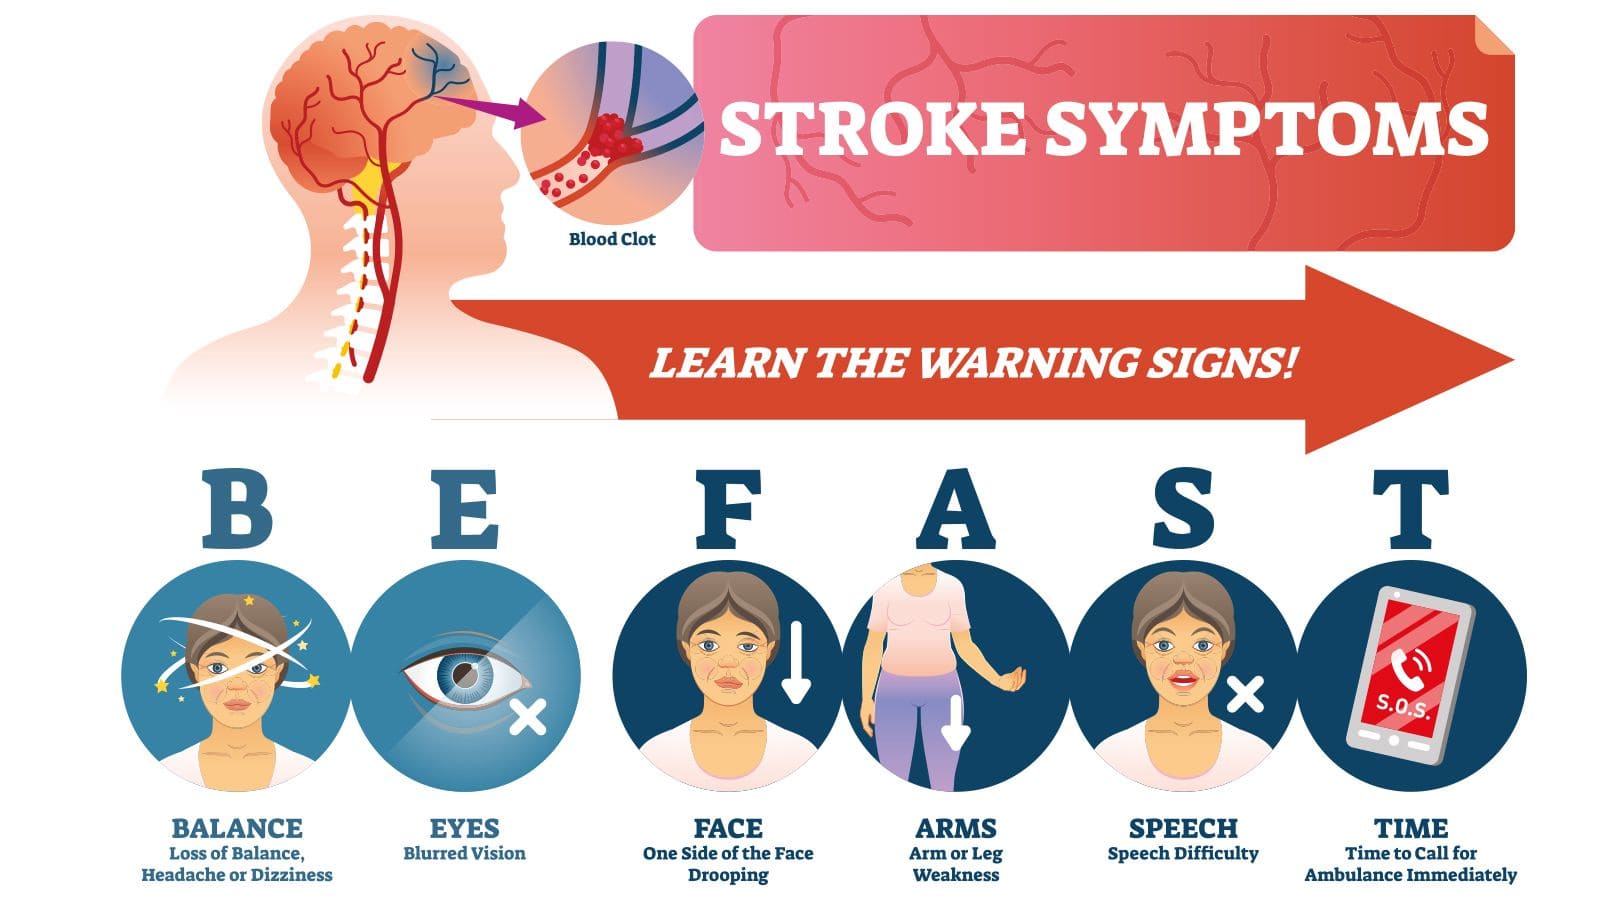 An illustration about the symptoms of stroke